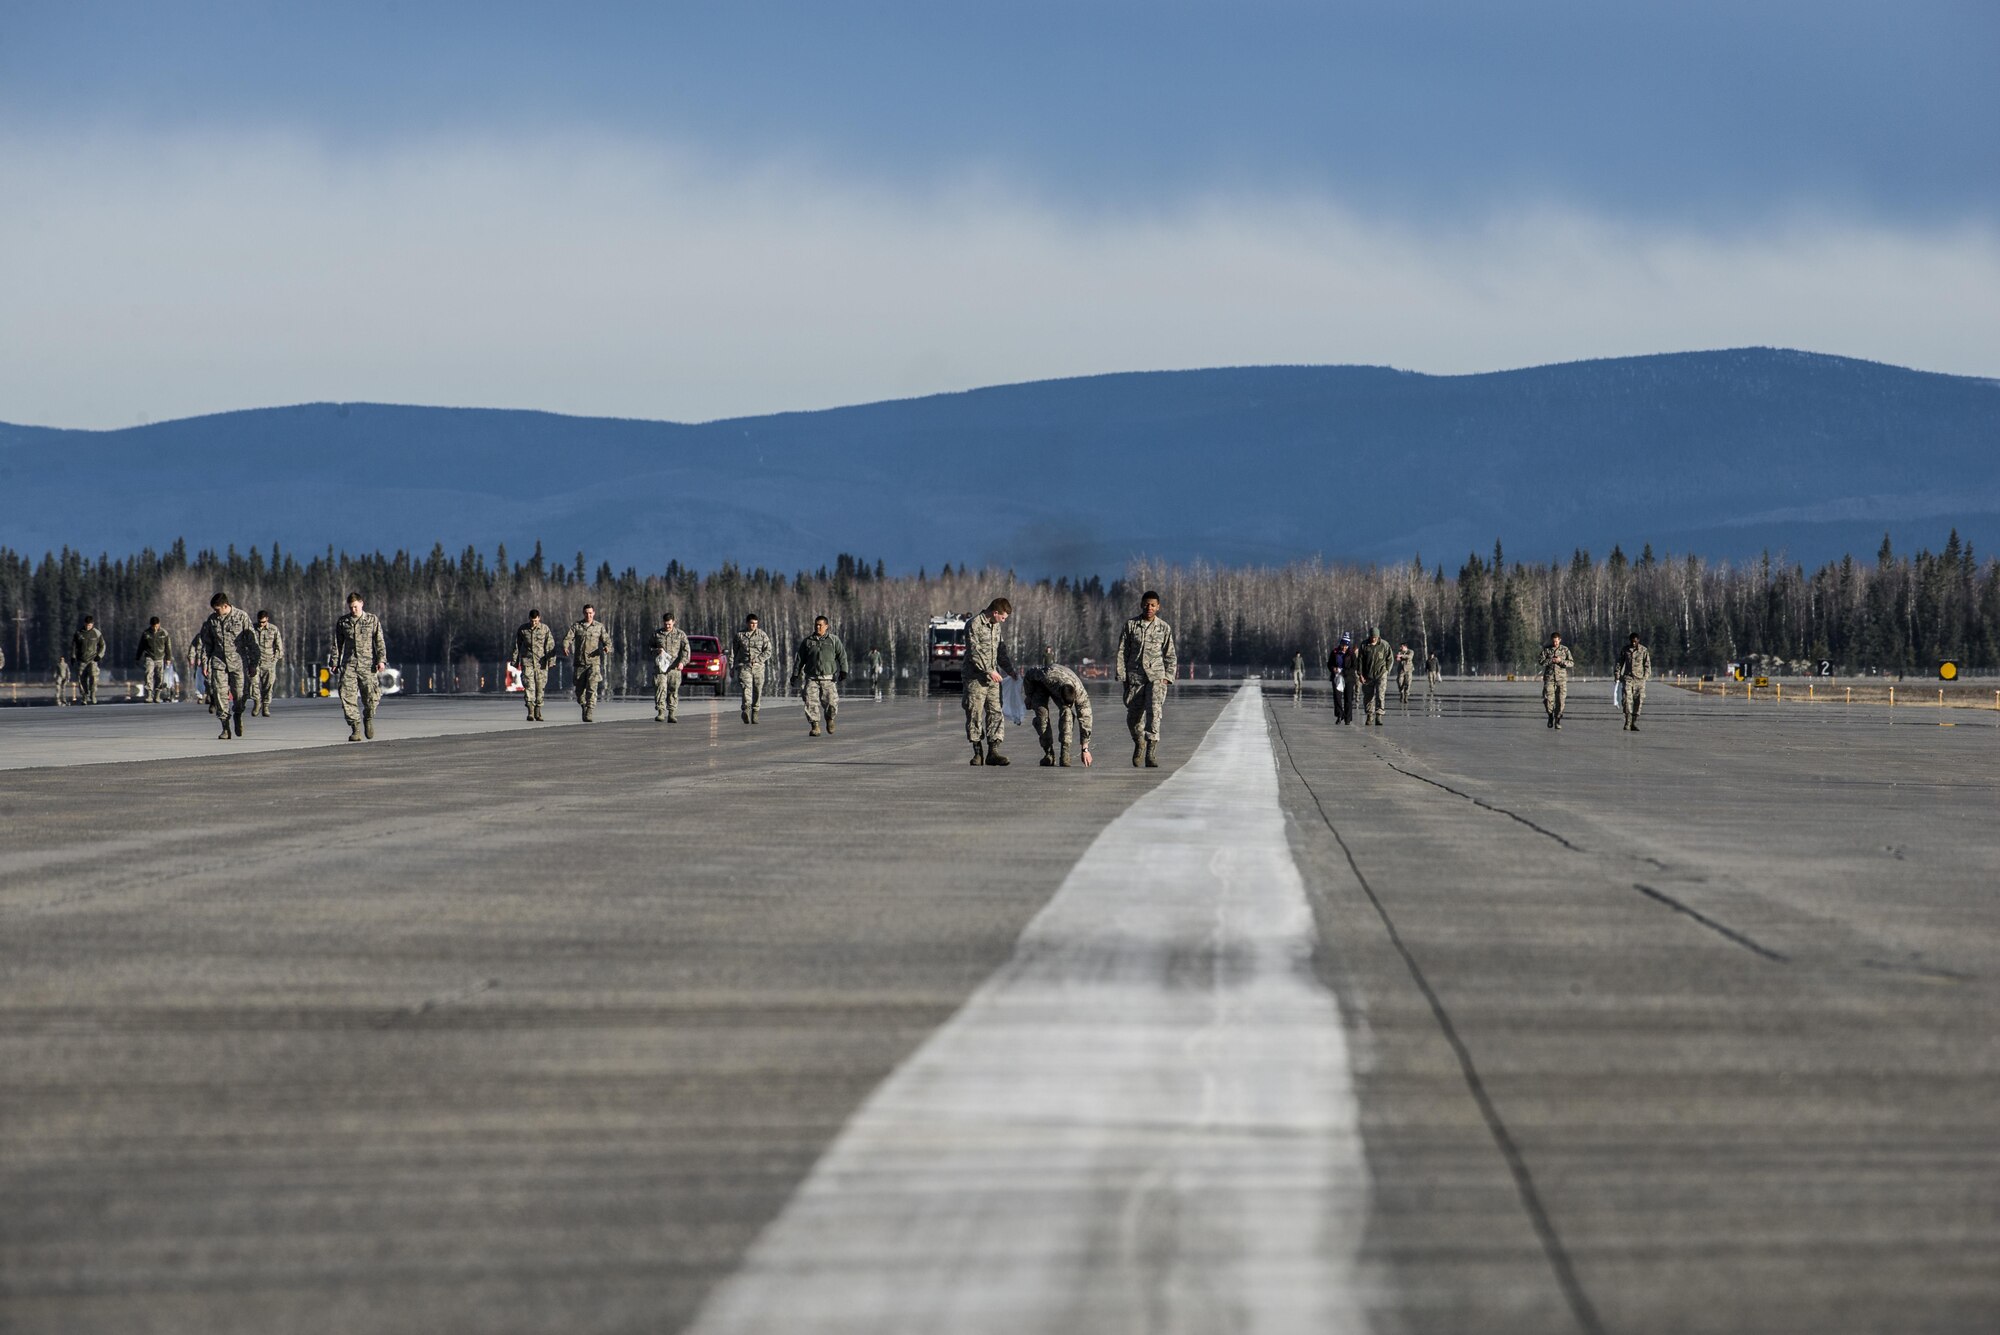 Airmen from Eielson Air Force Base, Alaska, conduct a wing-wide foreign-object debris (FOD) walk, April 11, 2016, to remove materials from the runway that could damage an aircraft during a takeoff or landing. The break-up of snow and preparation for RED FLAG-Alaska 16-1 inspired the FOD walk. (U.S. Air Force photo by Staff Sgt. Joshua Turner/Released)